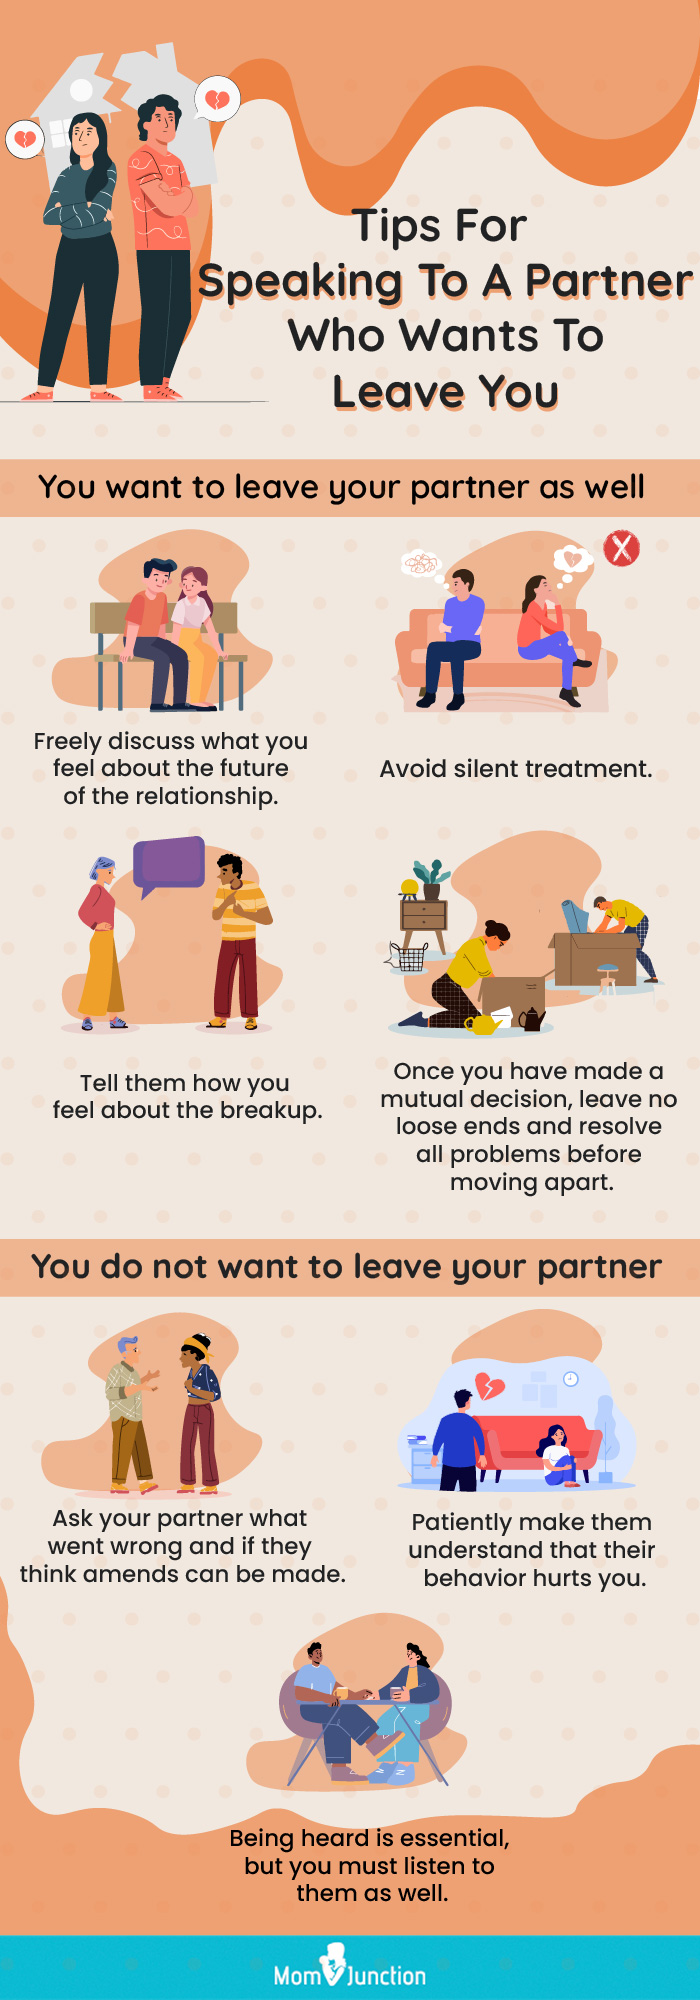 tips For speaking to a partner who wants to leave you (infographic)